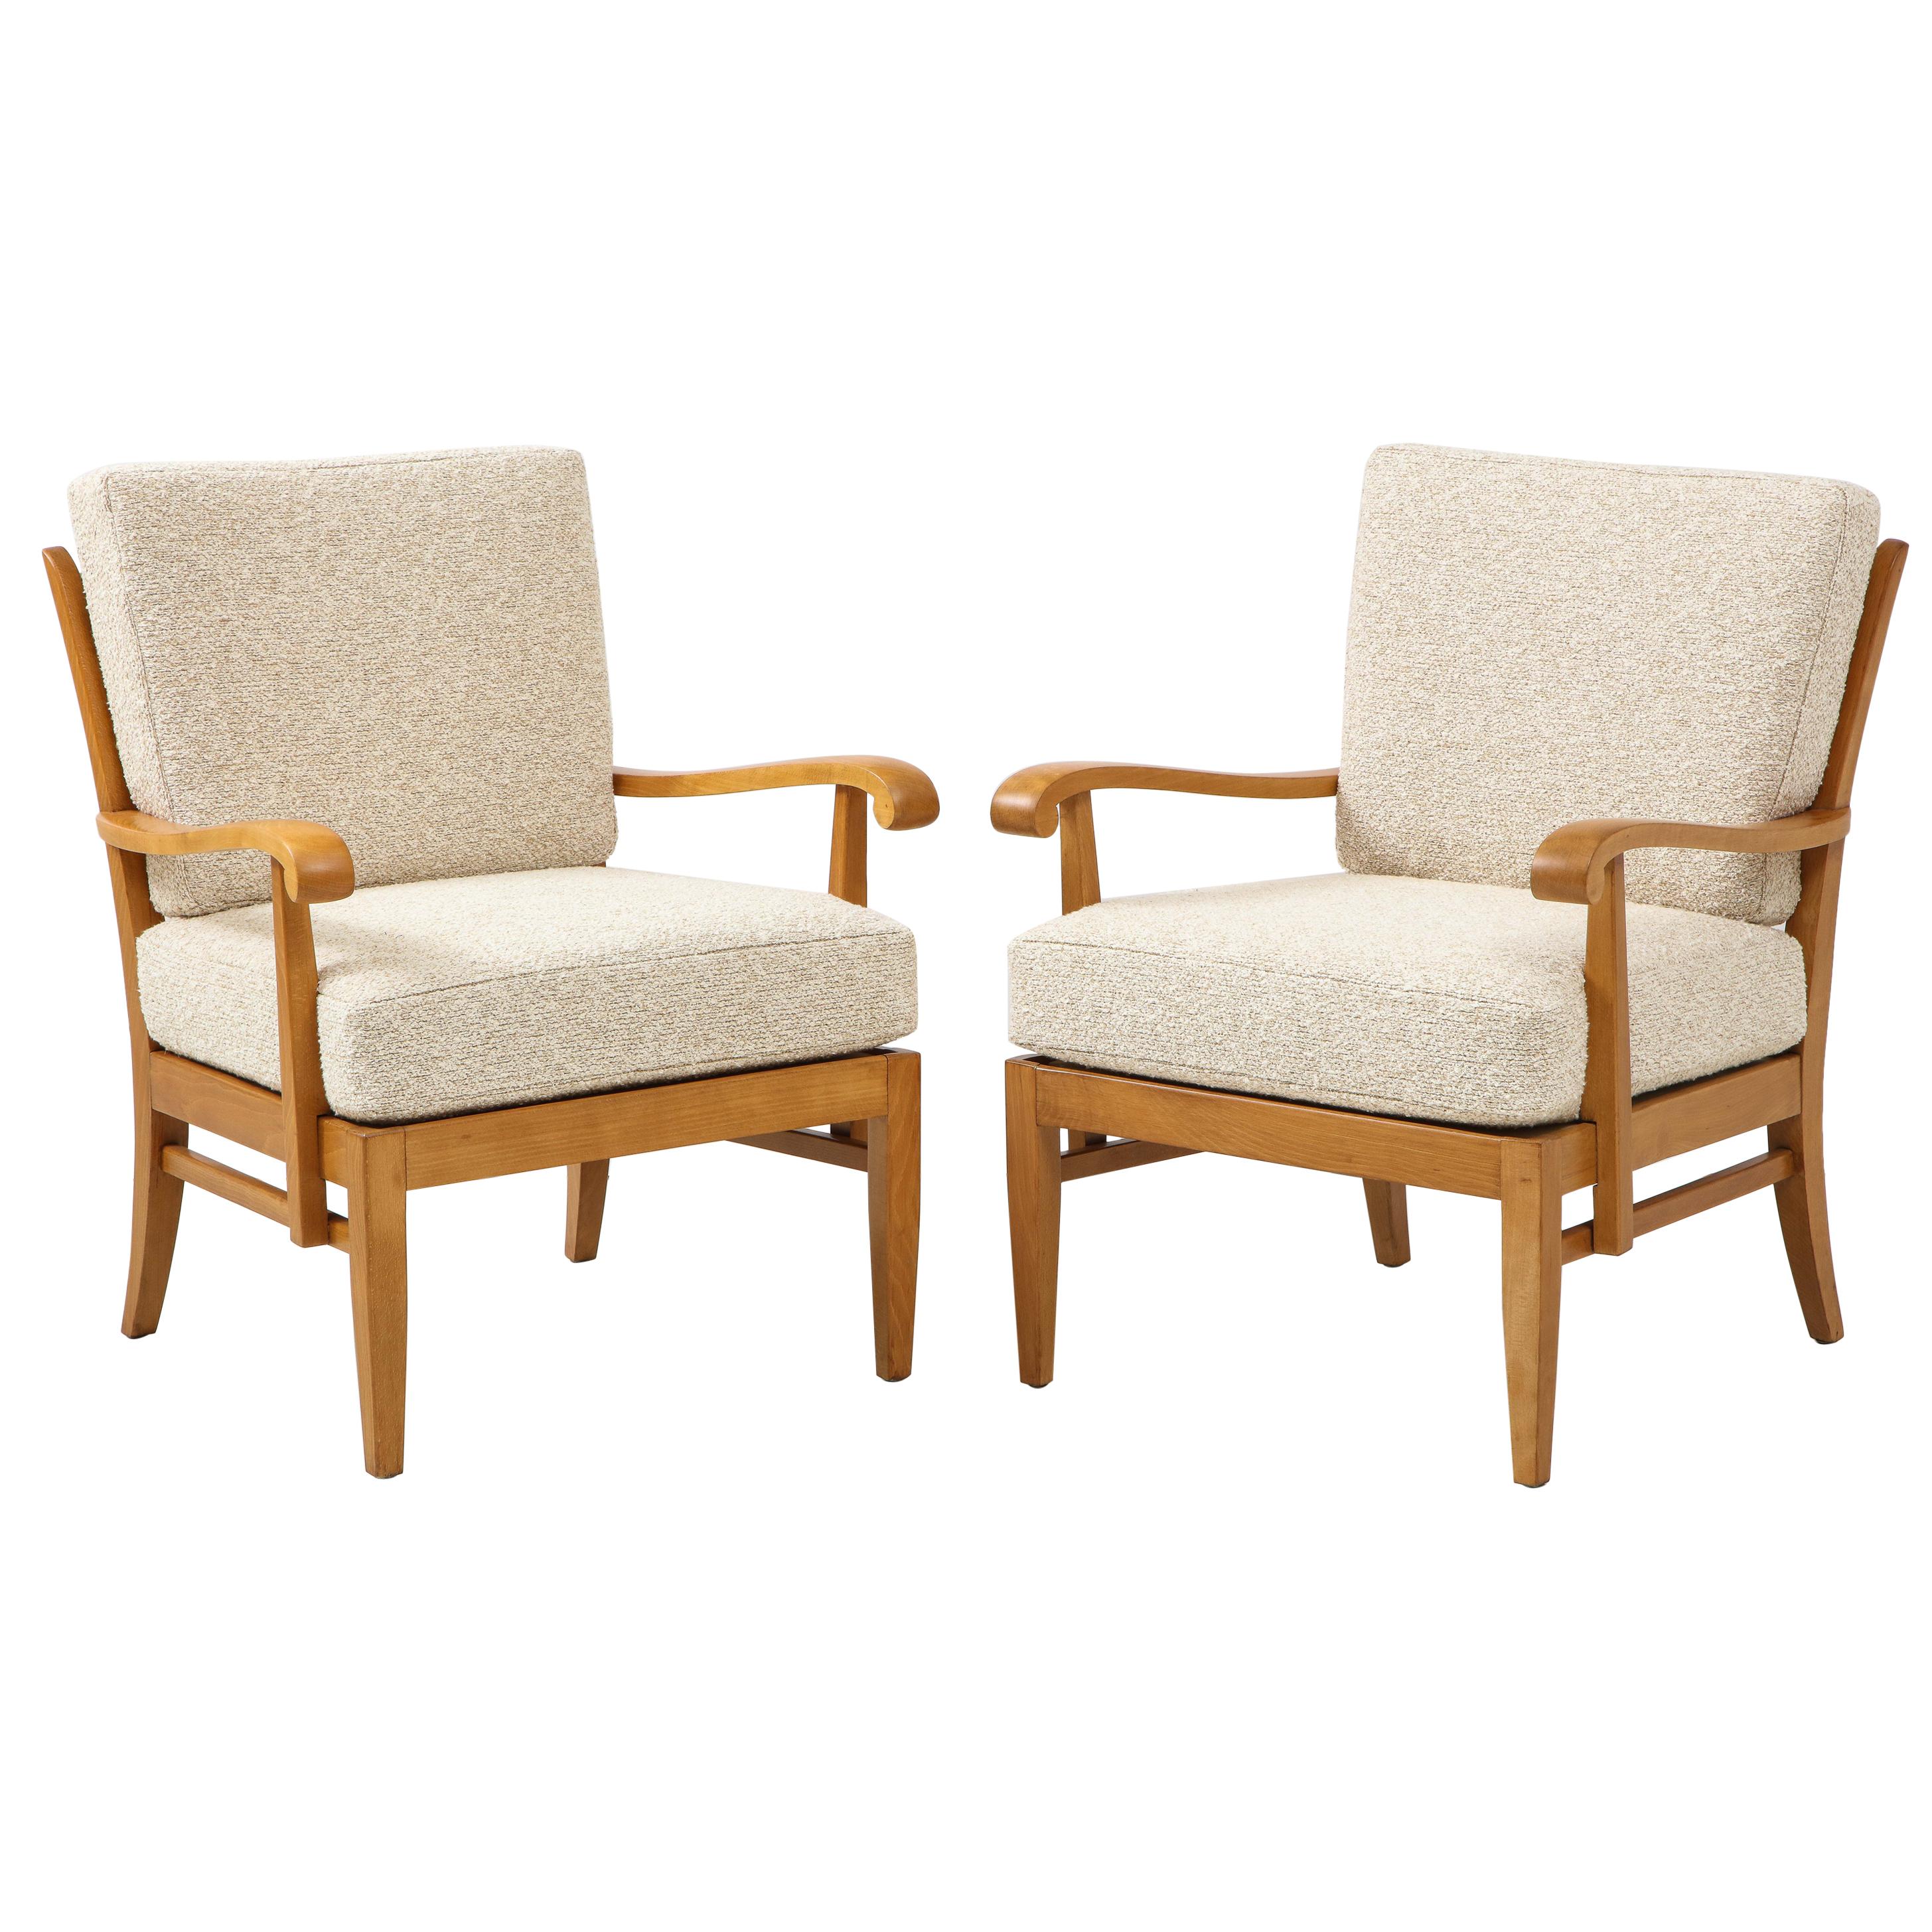 Pair of Maison Gouffé Armchairs, France, circa 1940, Labeled, Numbered